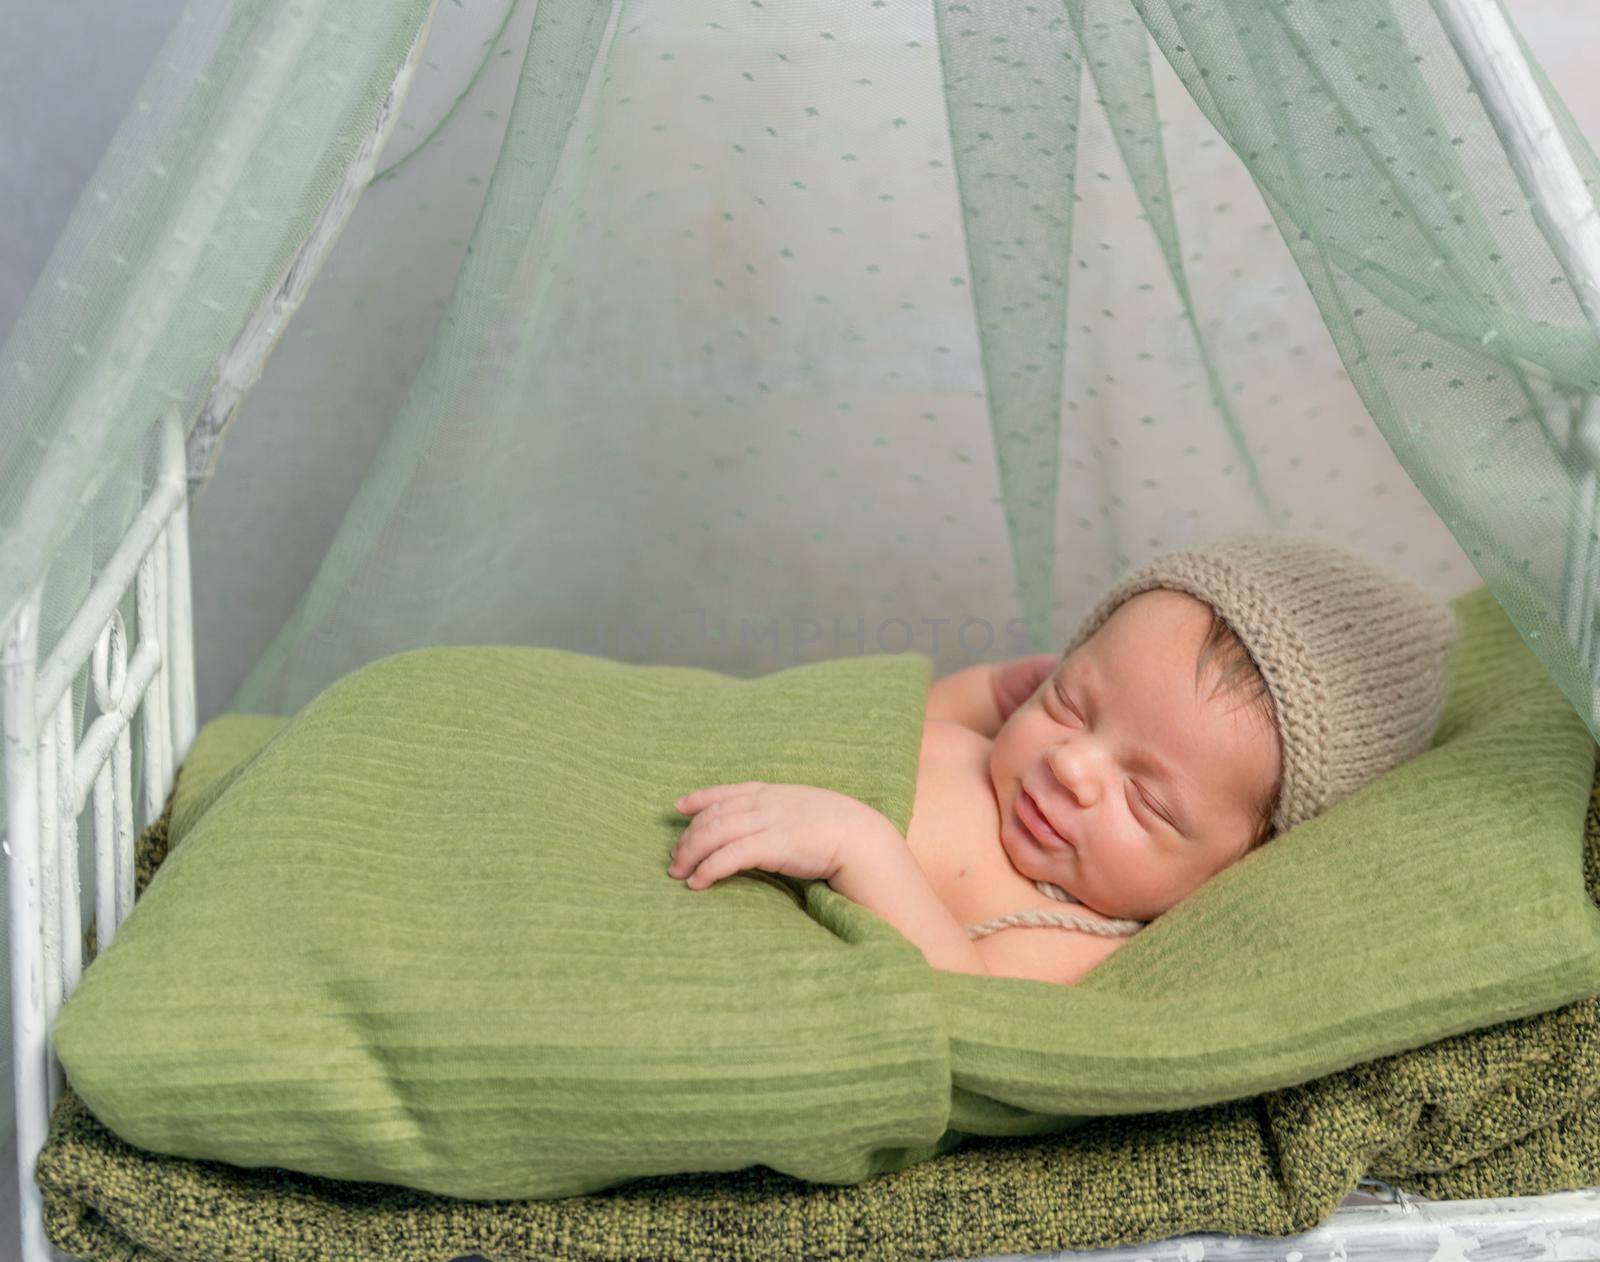 newborn baby in hat covered with green blanket sleeping on little bed with canopy